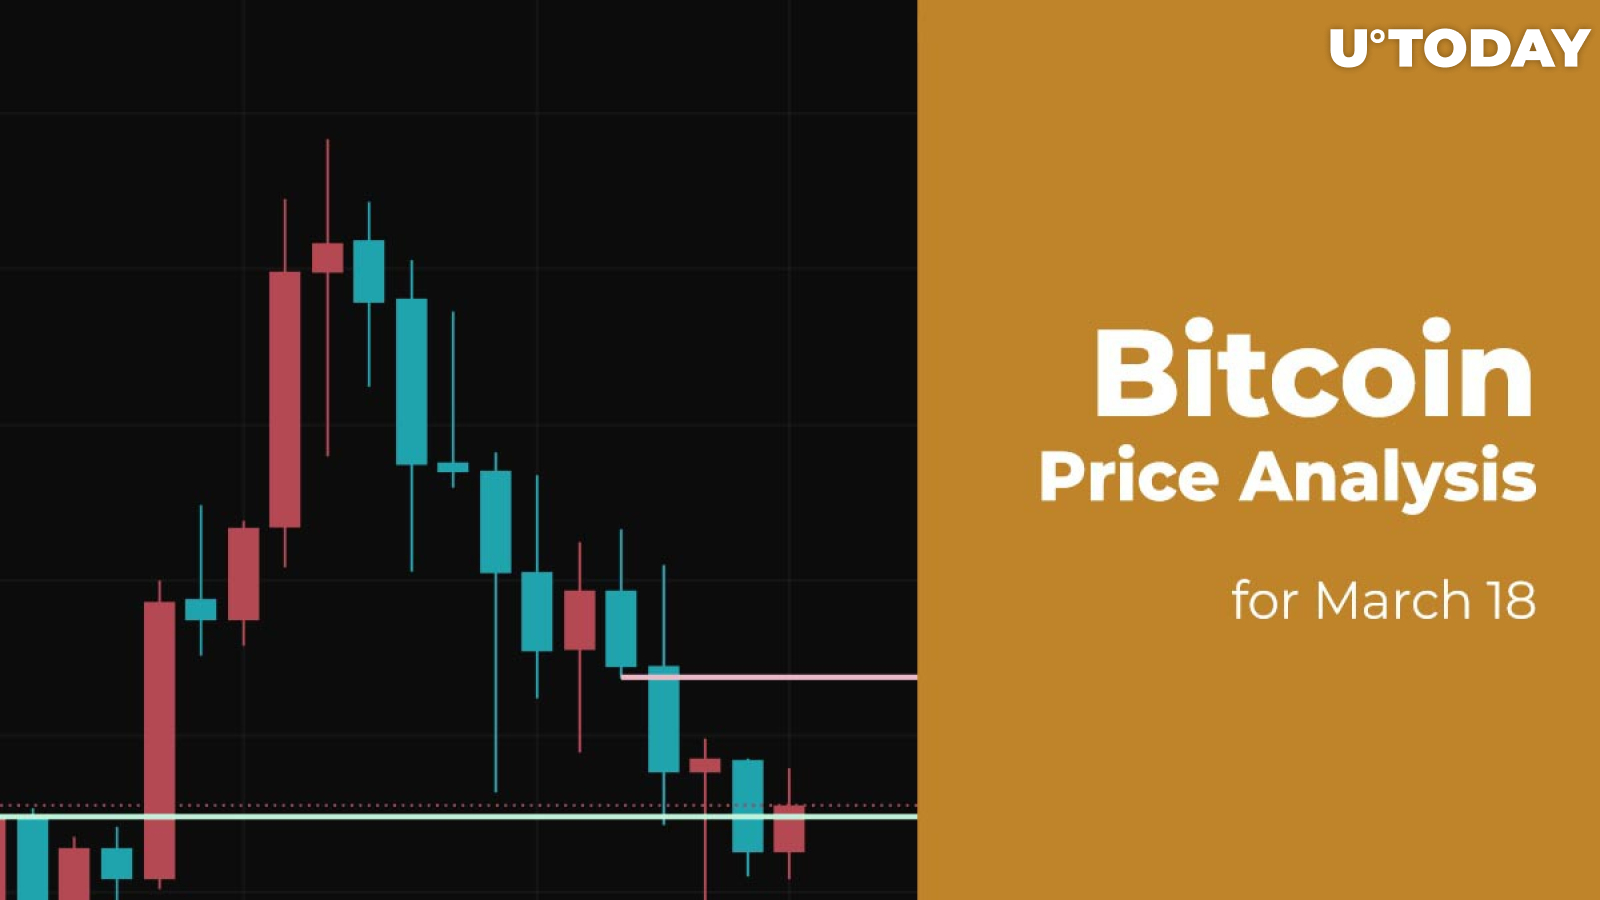 Bitcoin (BTC) Price Analysis for March 18